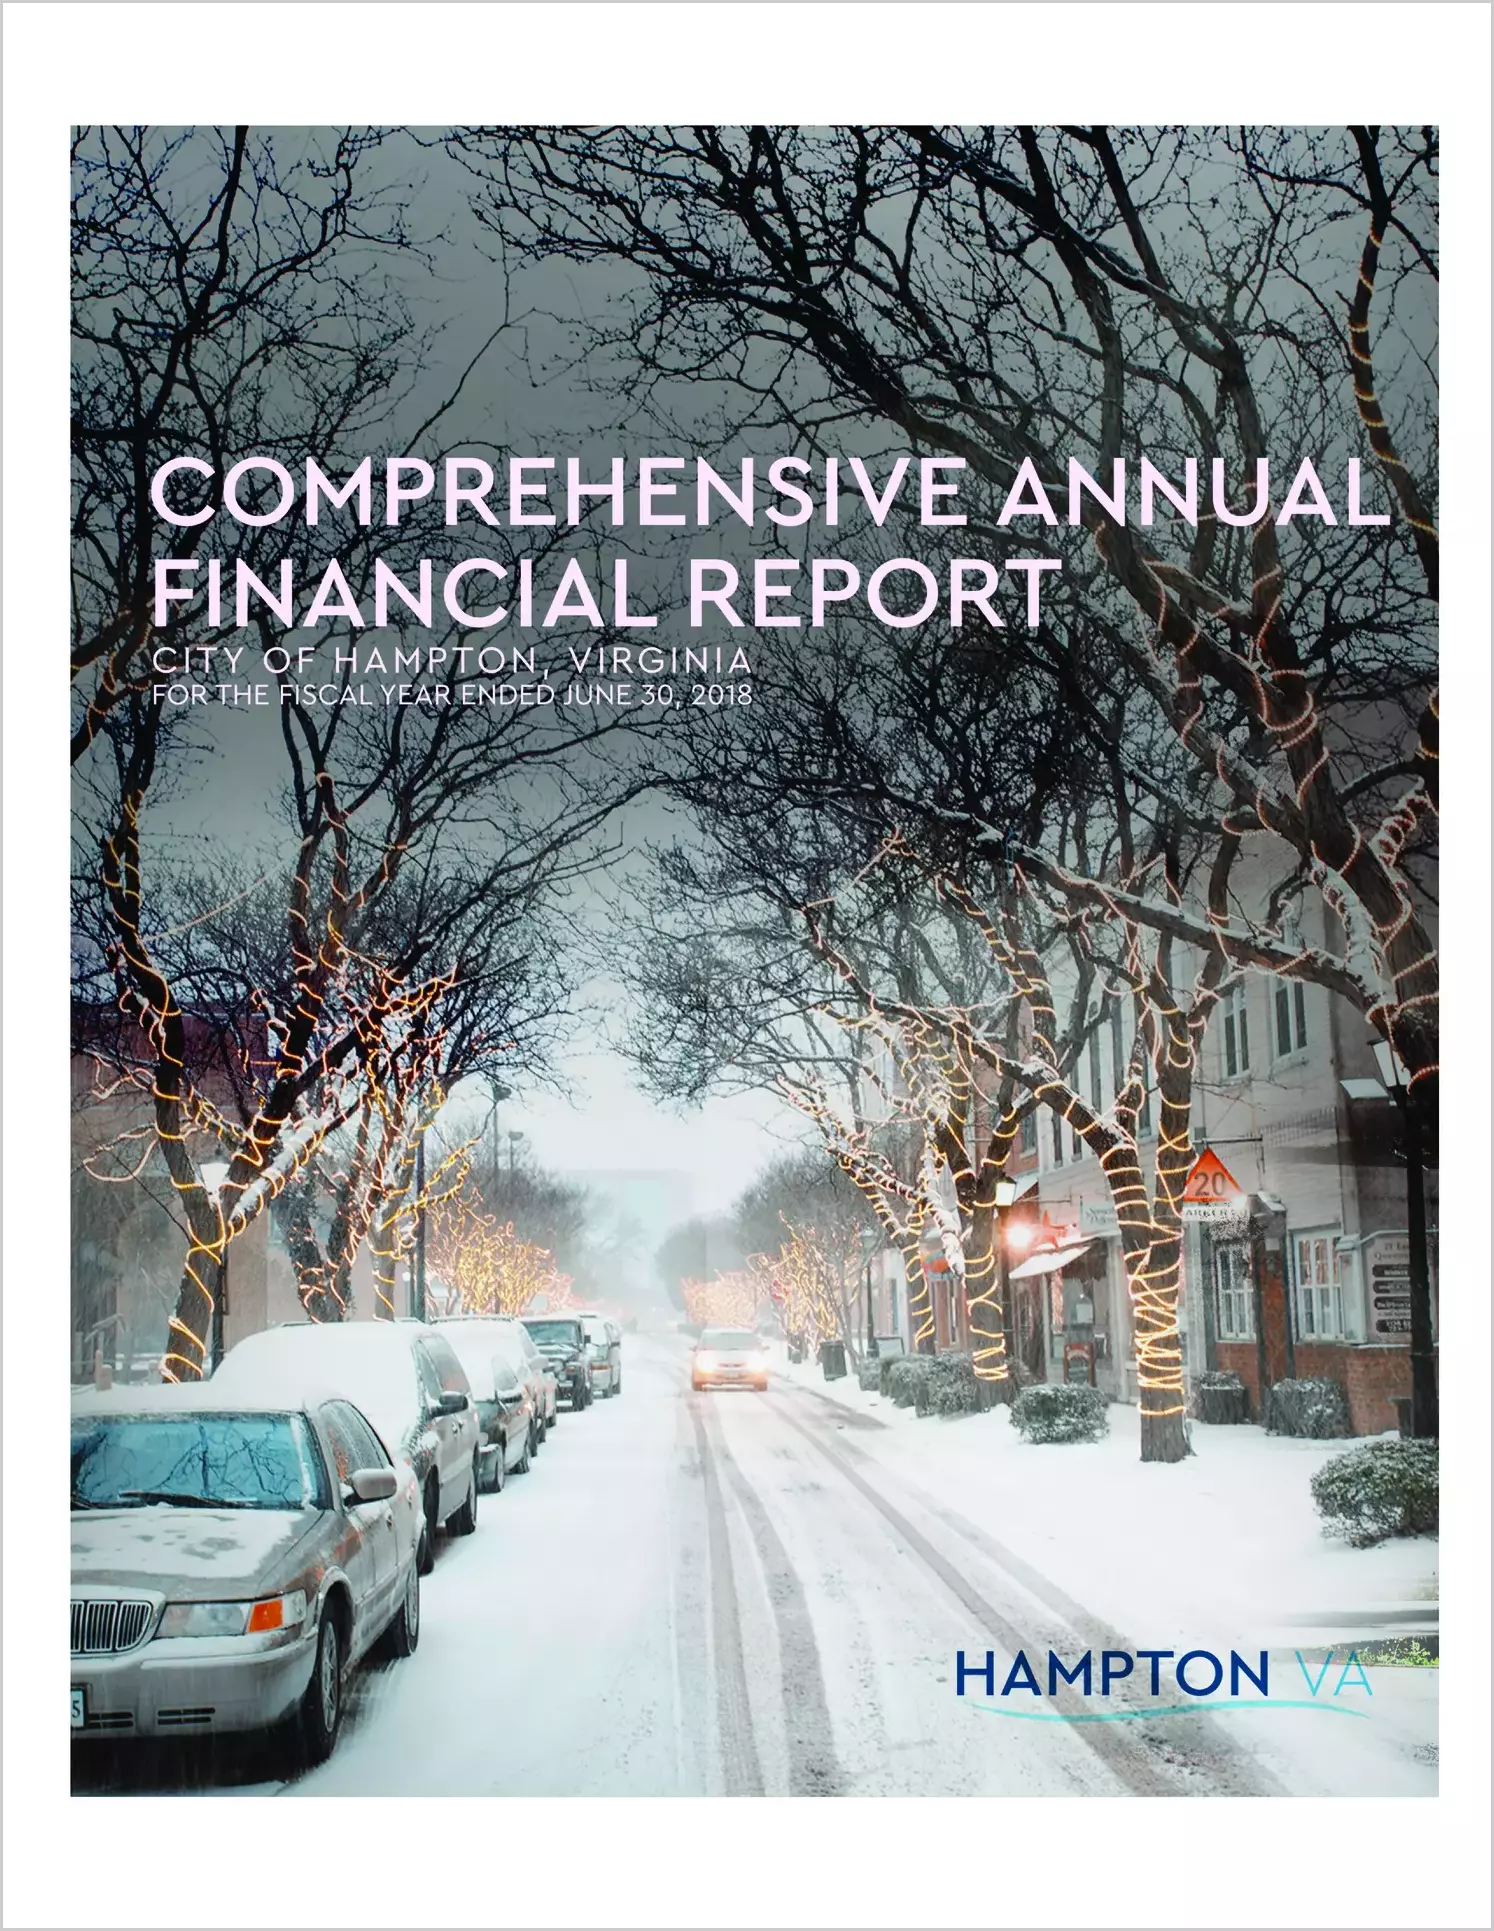 2018 Annual Financial Report for City of Hampton